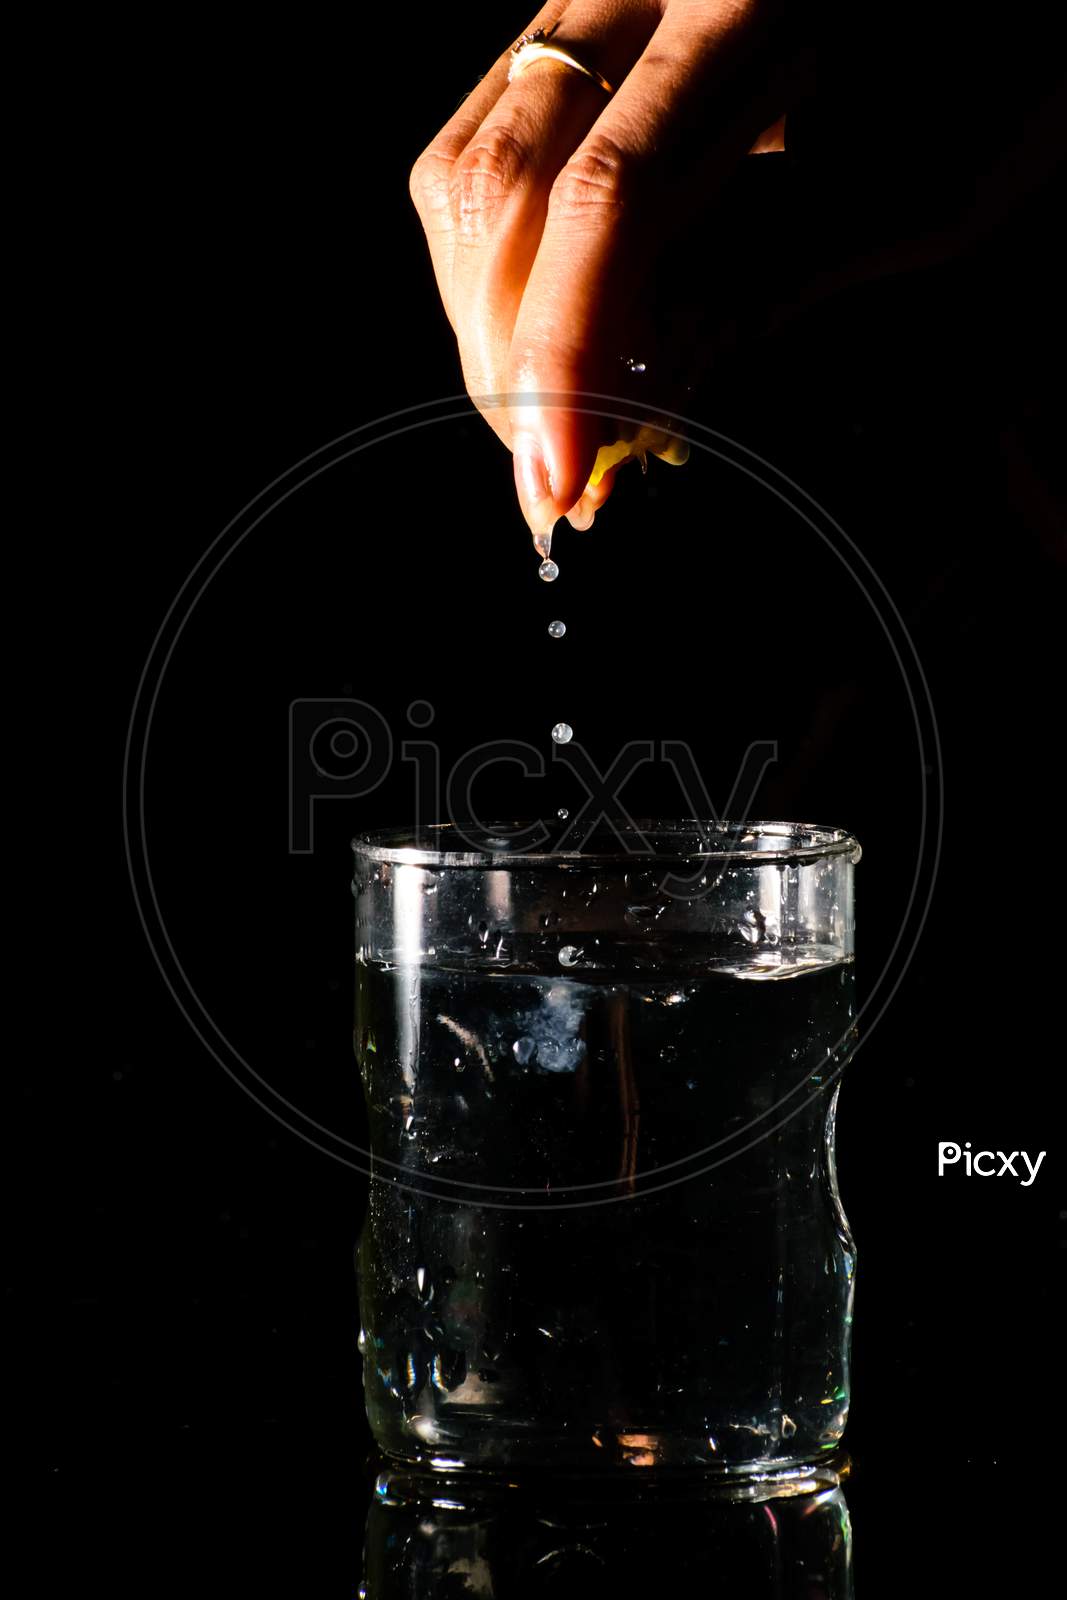 A Glass Of Water Placed On A Reflective Surface In A Dark Background And A Piece Of Cut Lemon Is Being Squeezed From Above And The Juice Is Falling